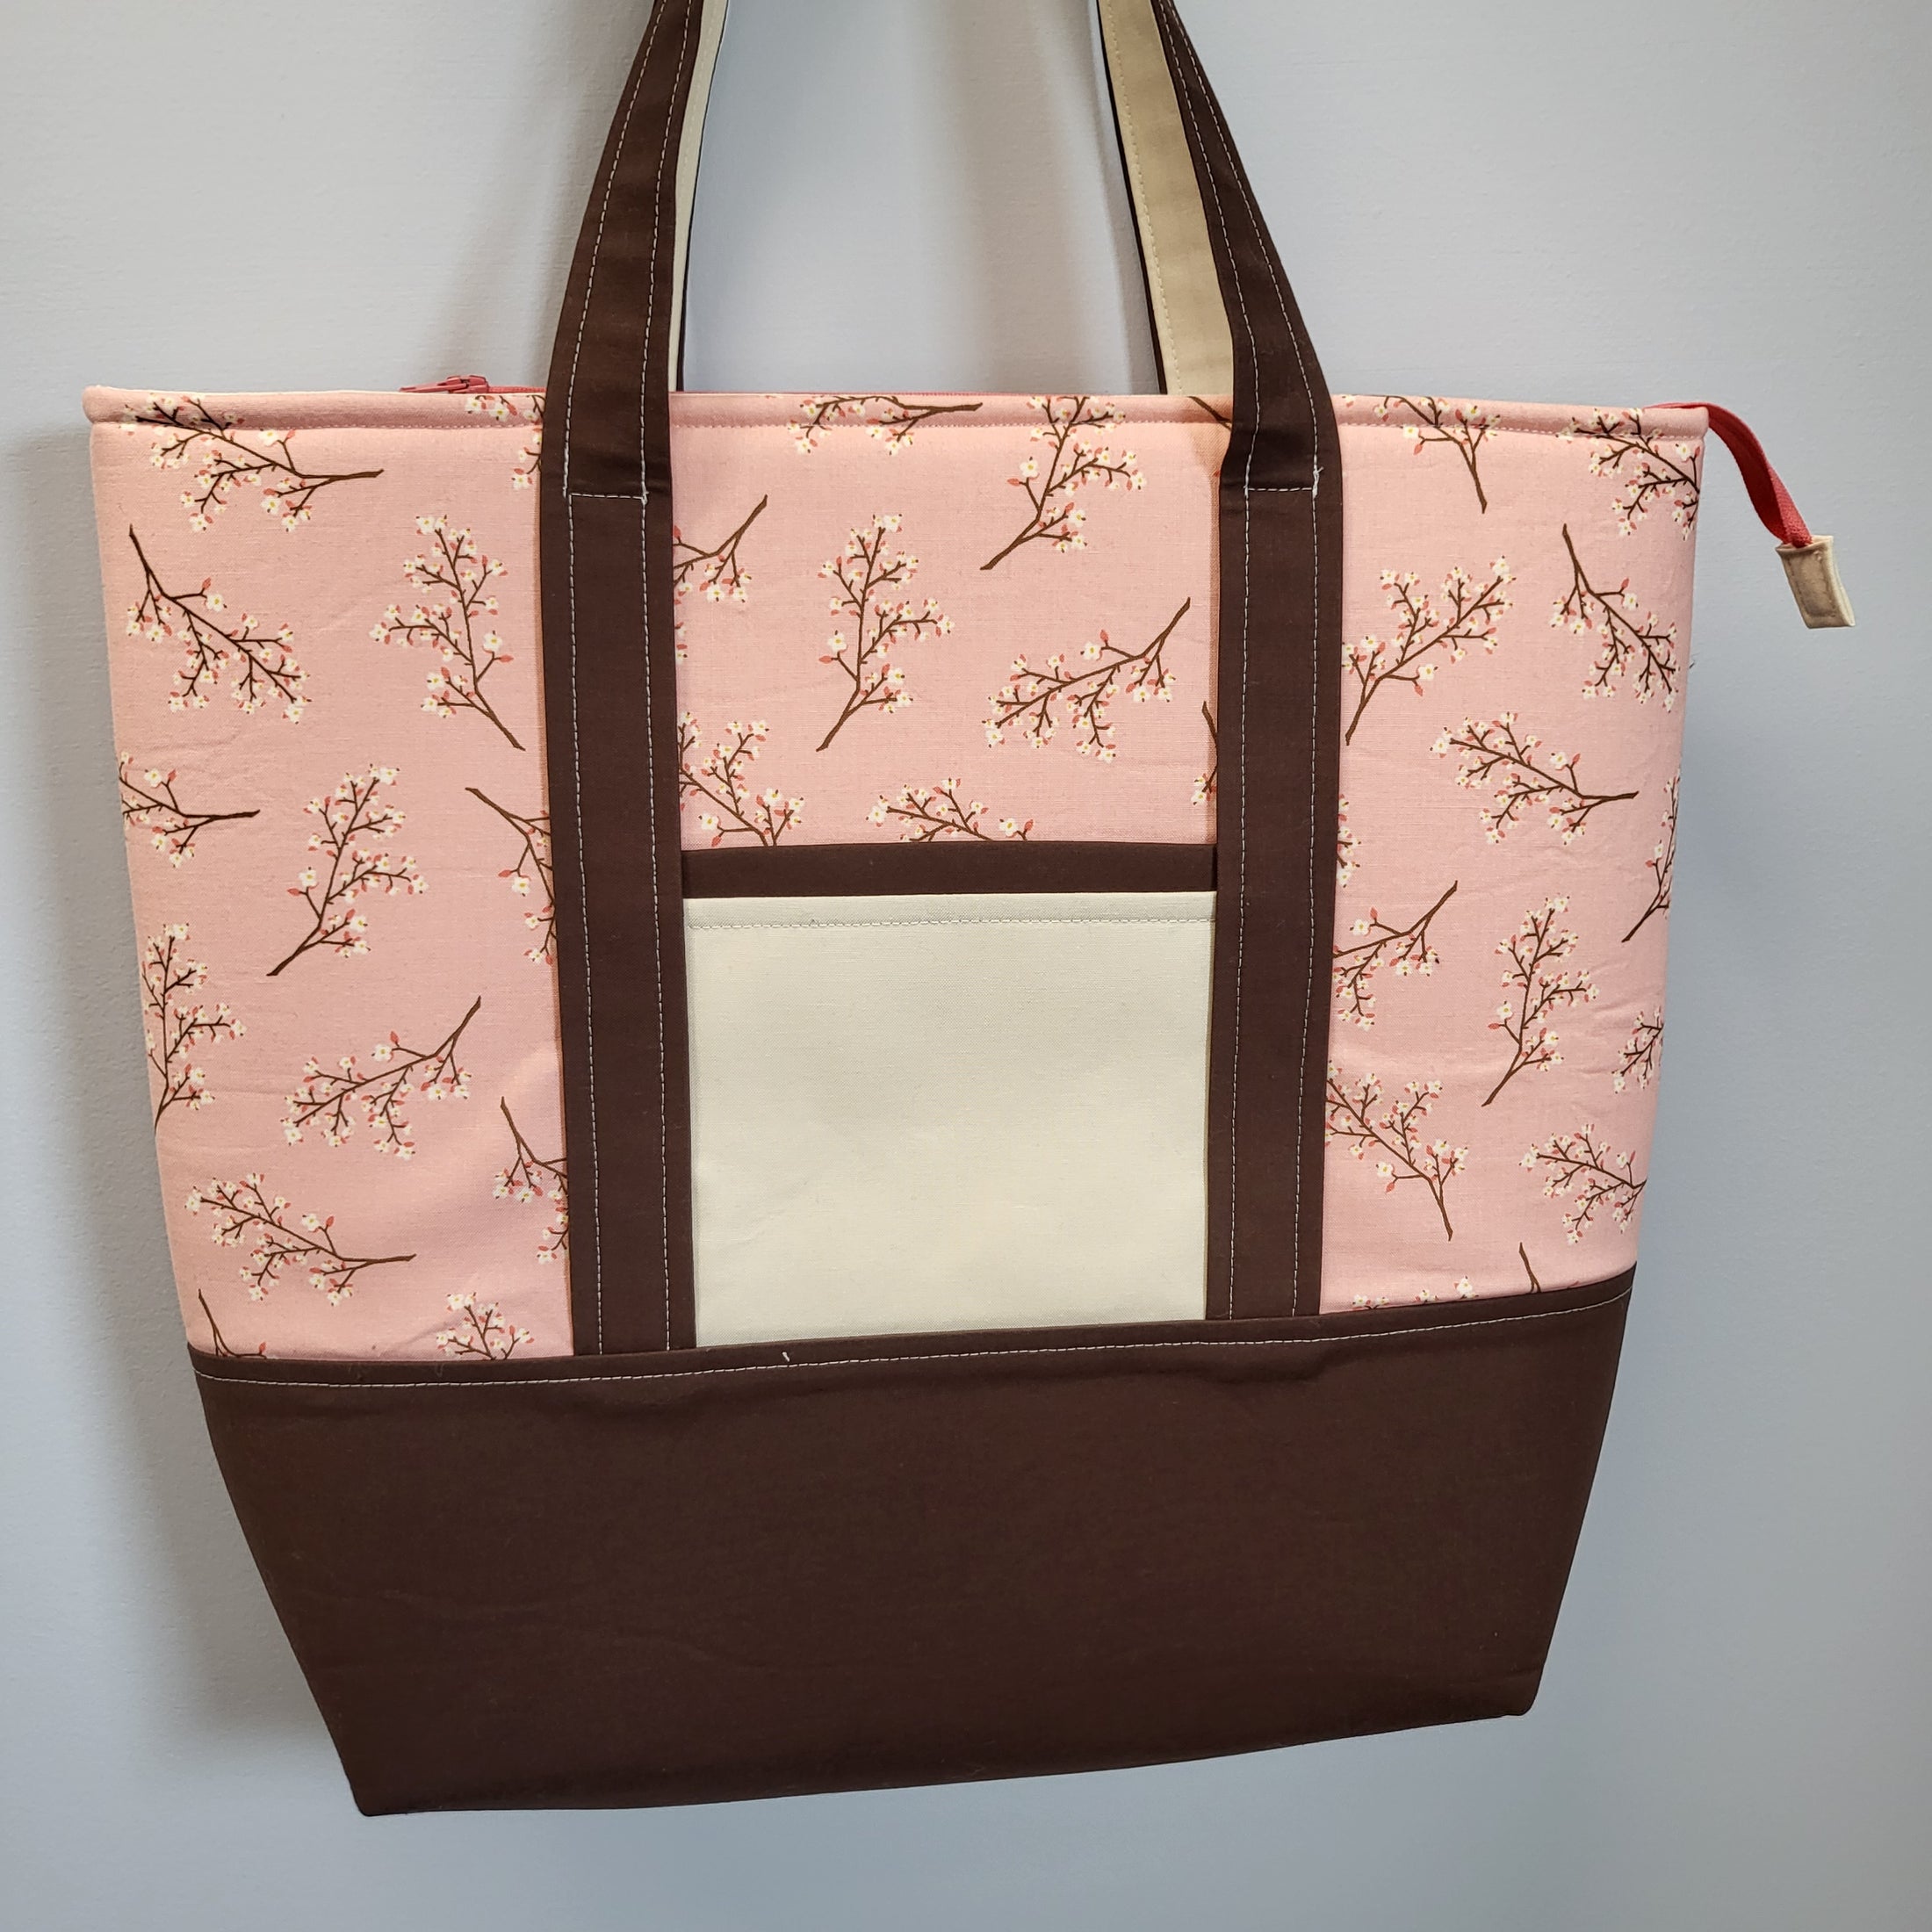 Padded cherry blossom tote bag with zippered main compartment and 2 exterior slip pockets. 